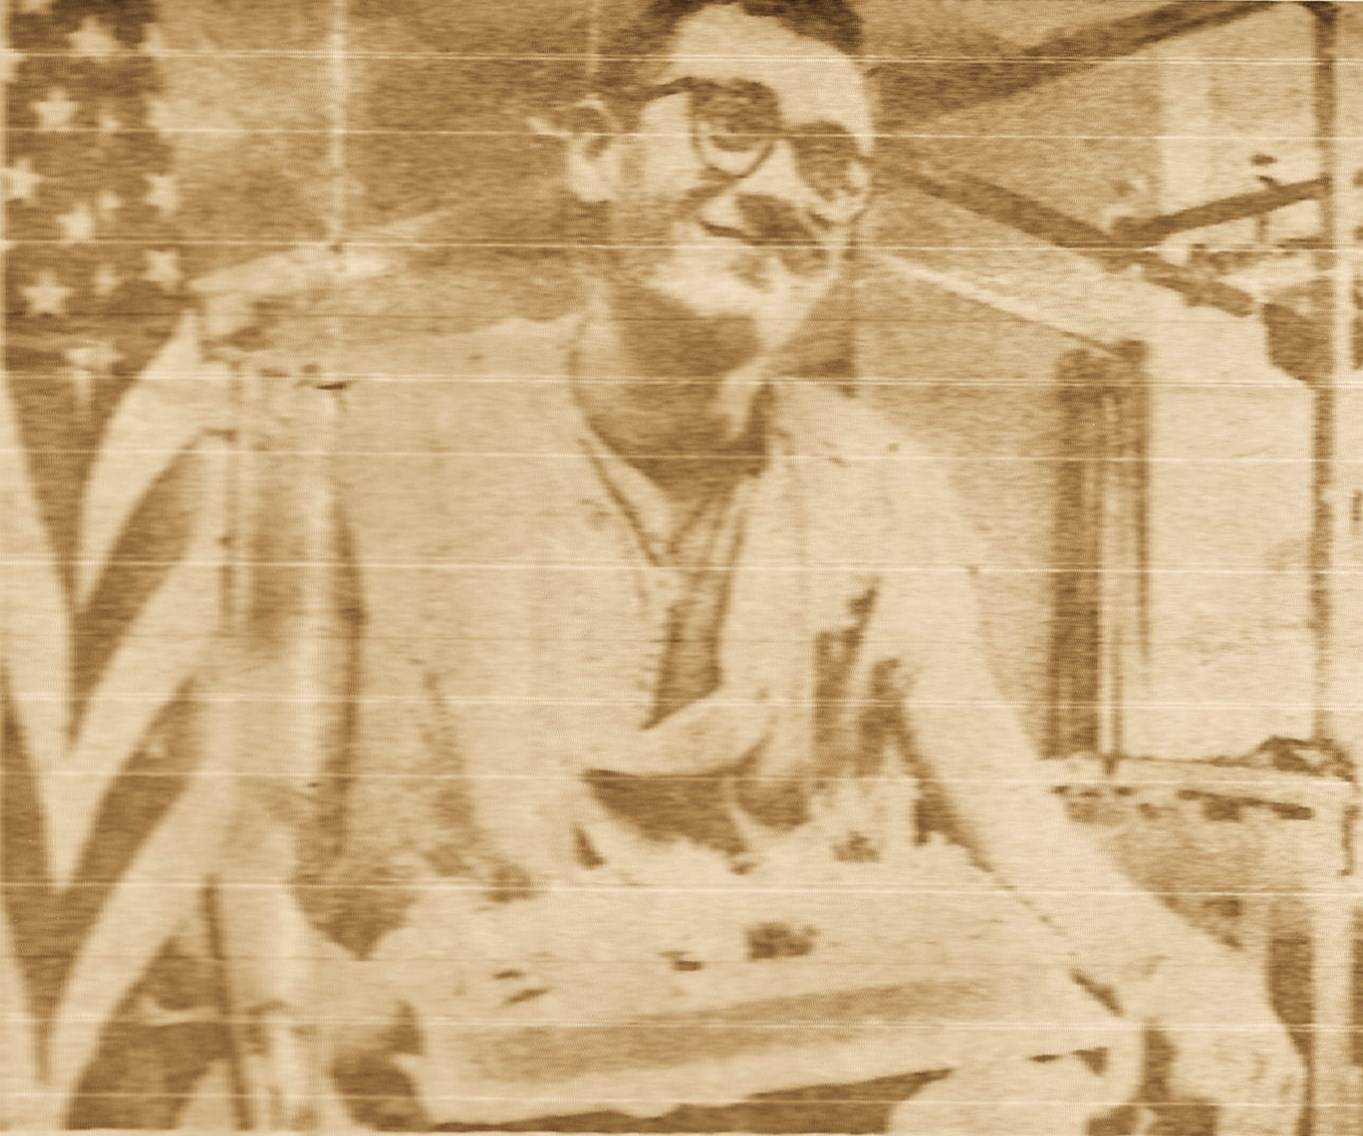 A grainy photo of a young man smiling, American flag in the foreground to the man's right.